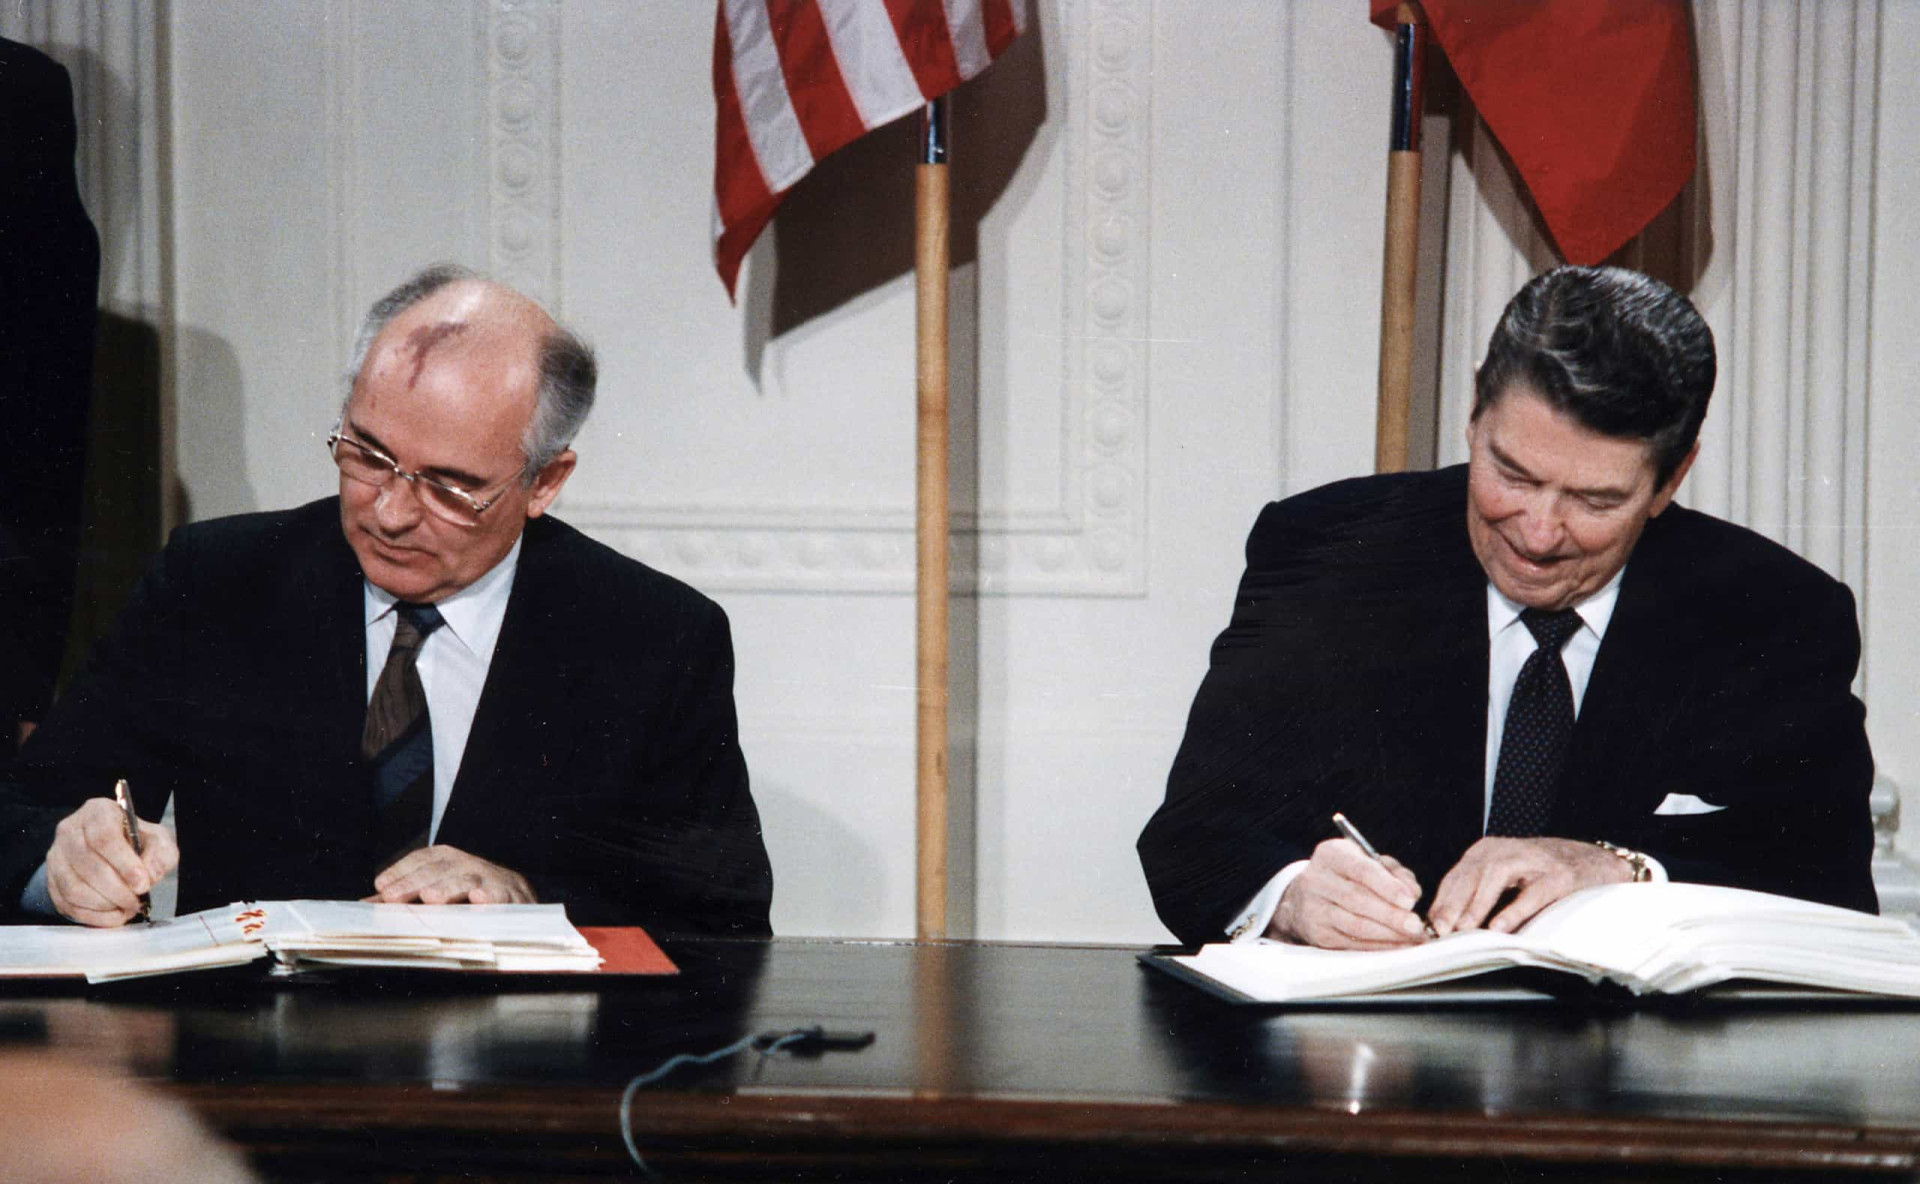 <p>A thaw in the Cold War sees the clock gain three minutes as Ronald Reagan and Mikhail Gorbachev sign the Intermediate-Range Nuclear Forces Treaty in Washington, D.C. on December 8, 1987, effective June 1, 1988.</p><p>You may also like:<a href="https://www.starsinsider.com/n/399001?utm_source=msn.com&utm_medium=display&utm_campaign=referral_description&utm_content=490923v3en-ca"> Facts about the world's most-hated jobs </a></p>